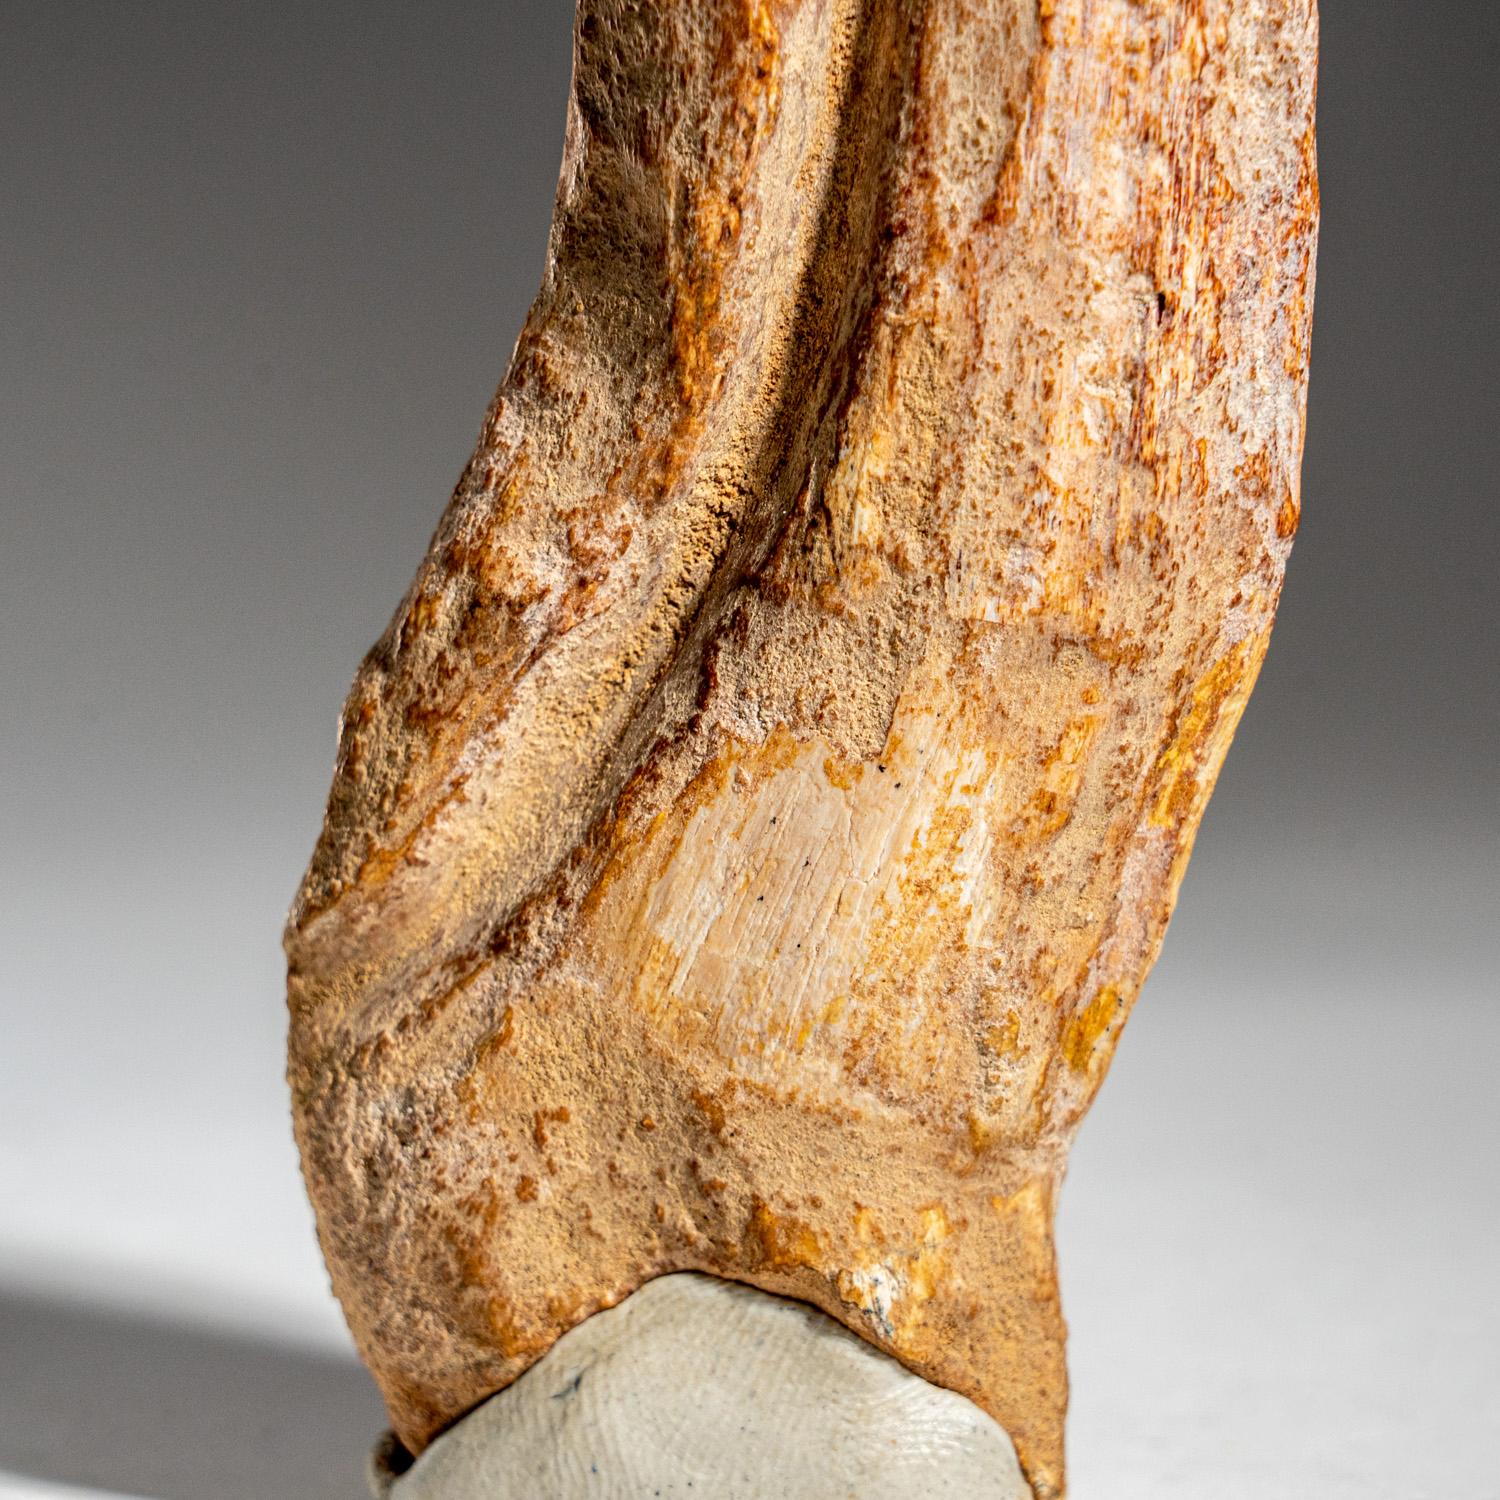 This huge, Museum-quality Spinosaur foot claw is genuine, completely in tact with no repairs and in prestine condition. This incredible specimen includes a display box for preservation and display purposes. Spinosaurus (meaning 